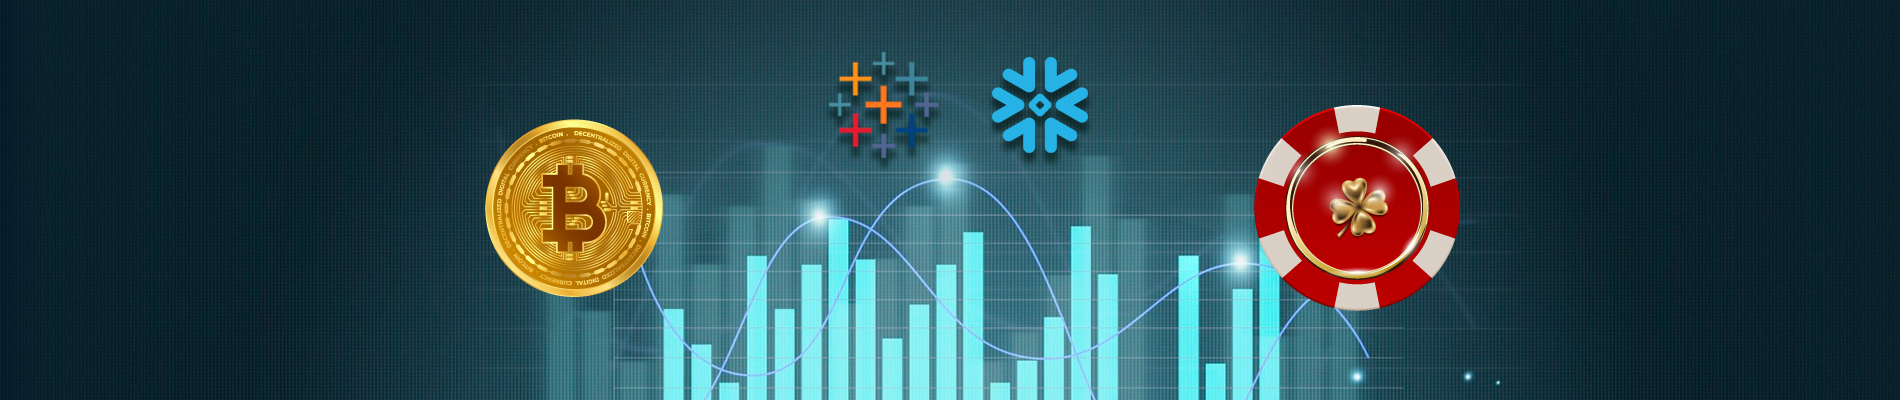 snowflake-and-tableau-near-real-time-reporting-analytics